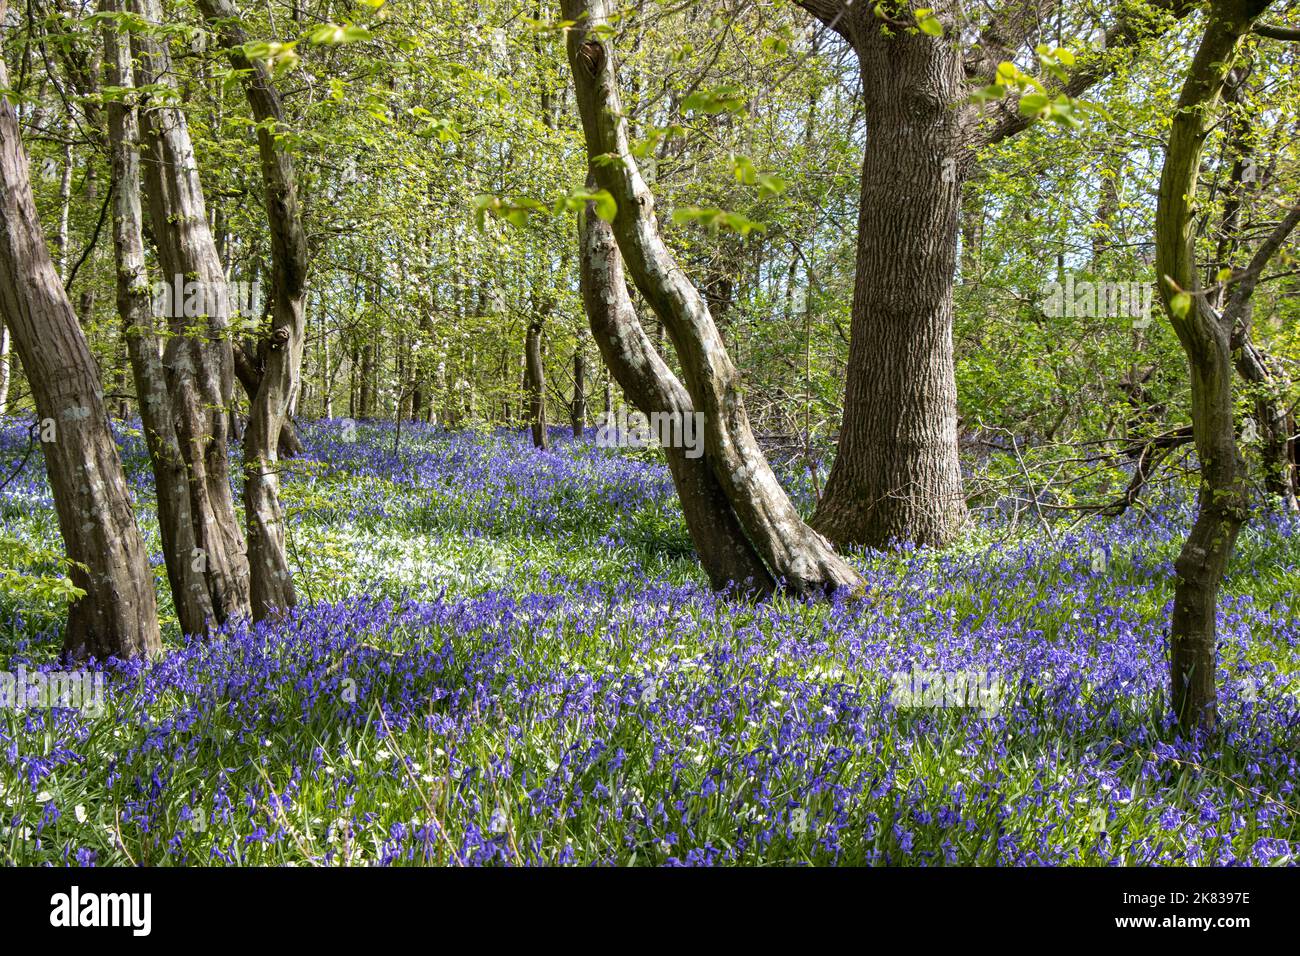 Bluebell carpet in a forest in Arlington, south England. Bluebell walk. Stock Photo